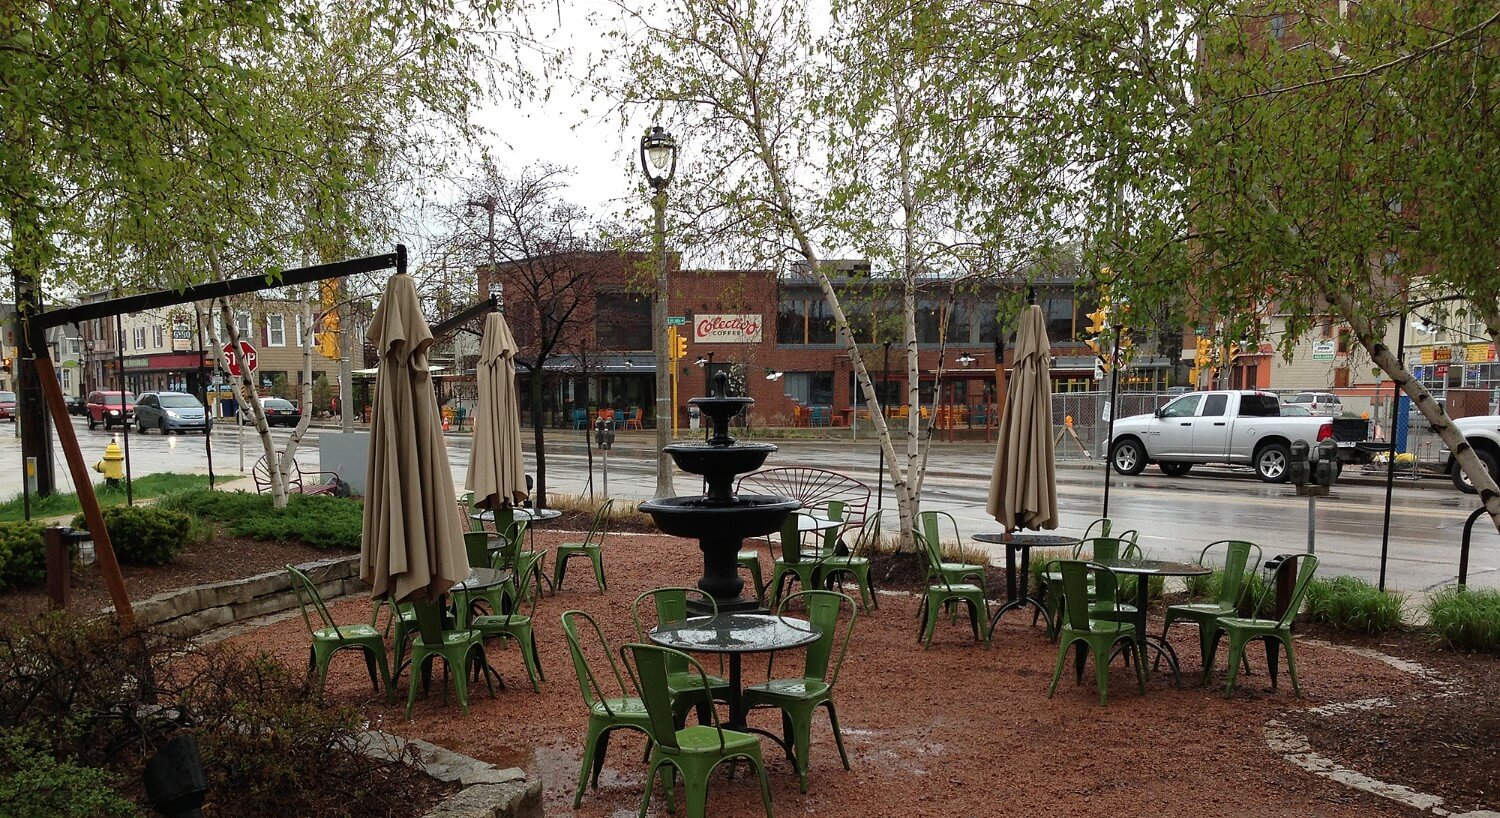 Seating area with green metal tables and chairs on a red gravel patio next to the street.